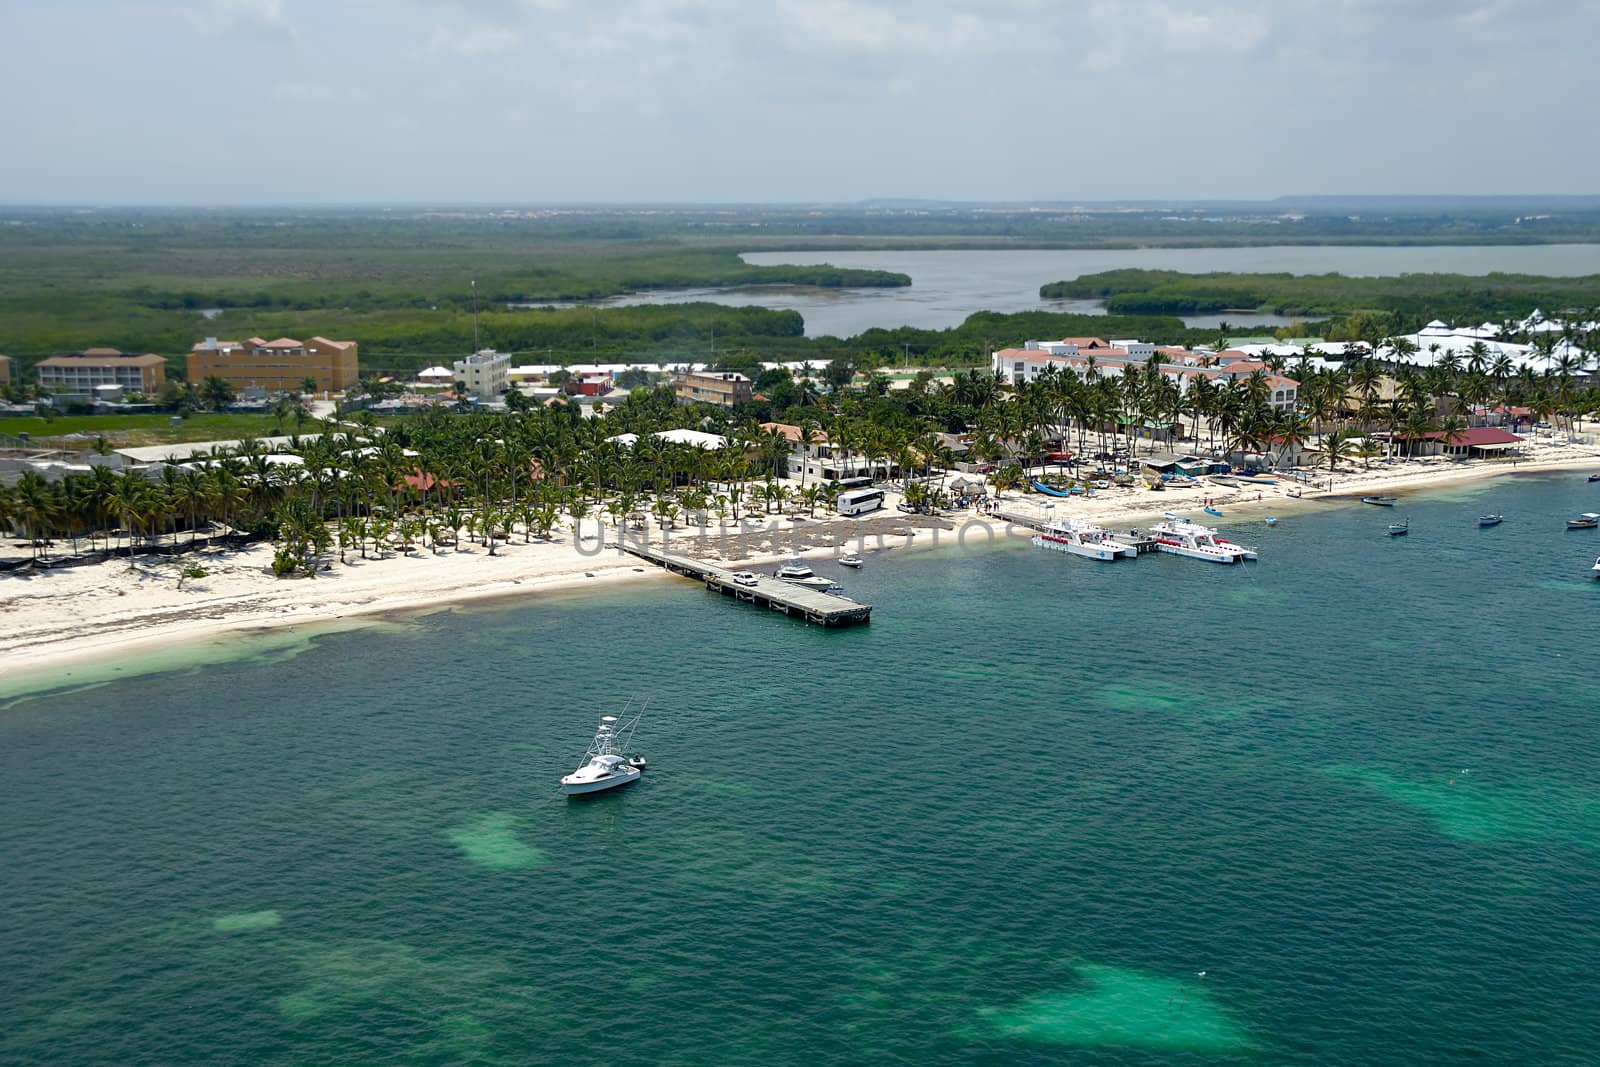 A beutiful beach in the caribbean and boats. Taken form helicopter. Dominican Republic.